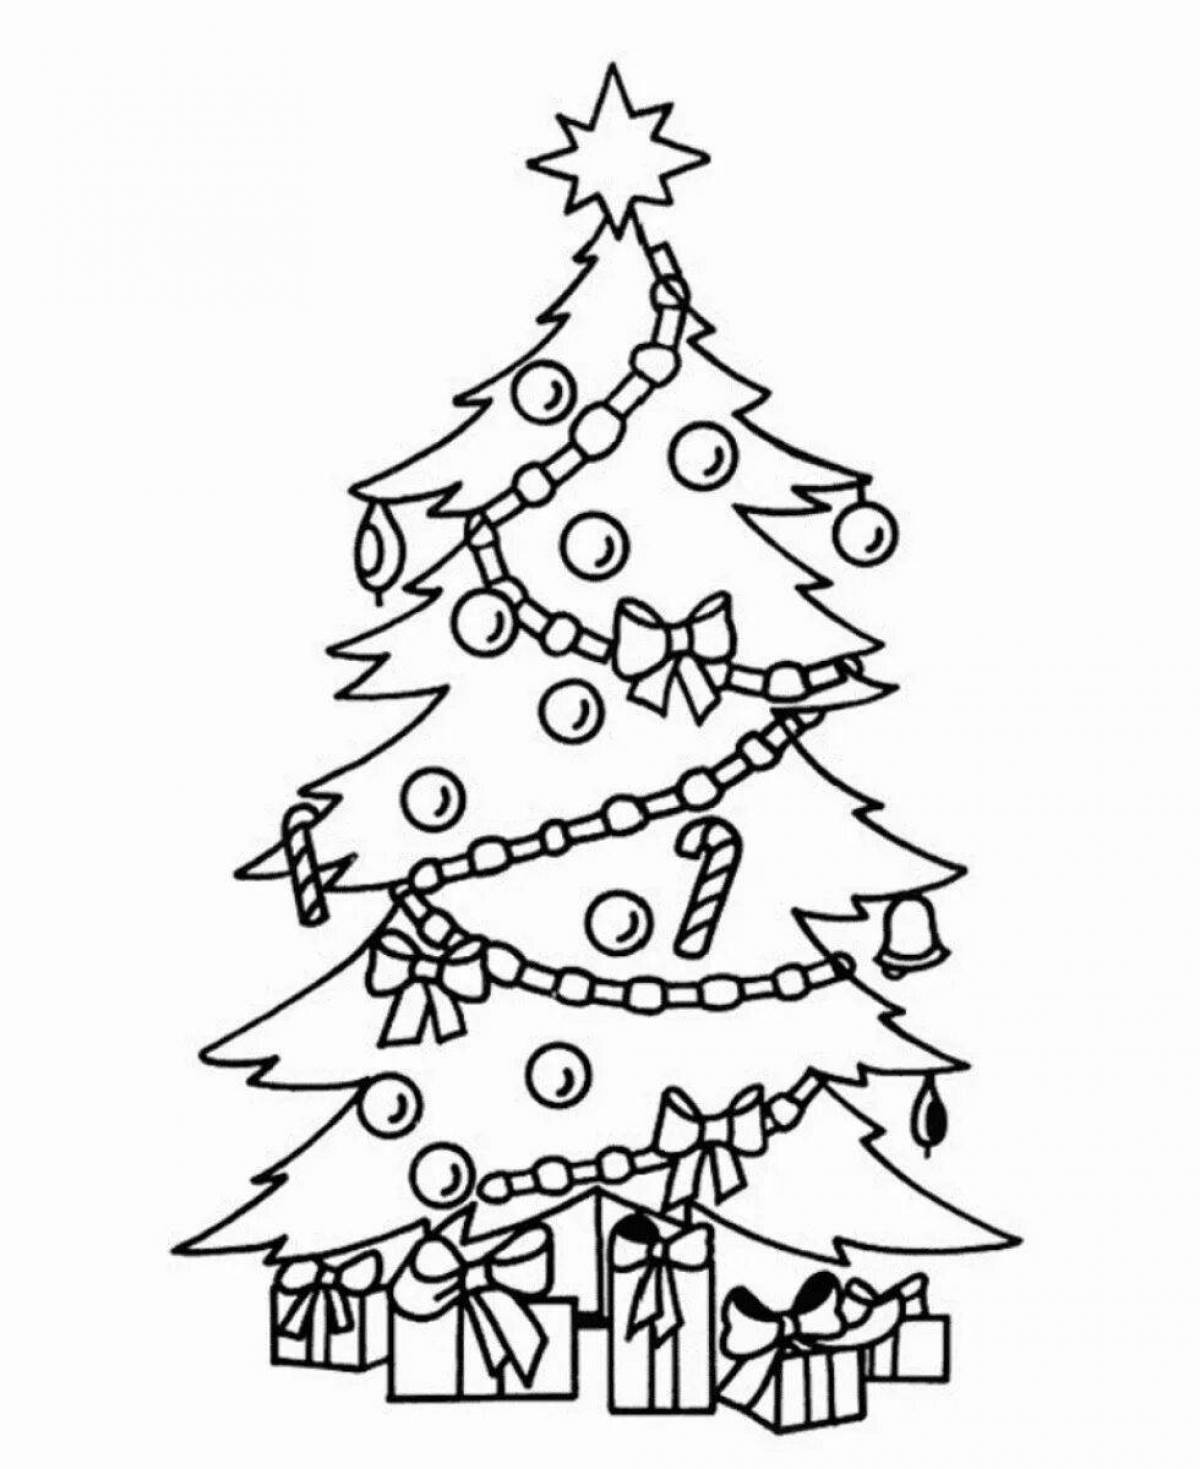 Great big tree coloring book for kids